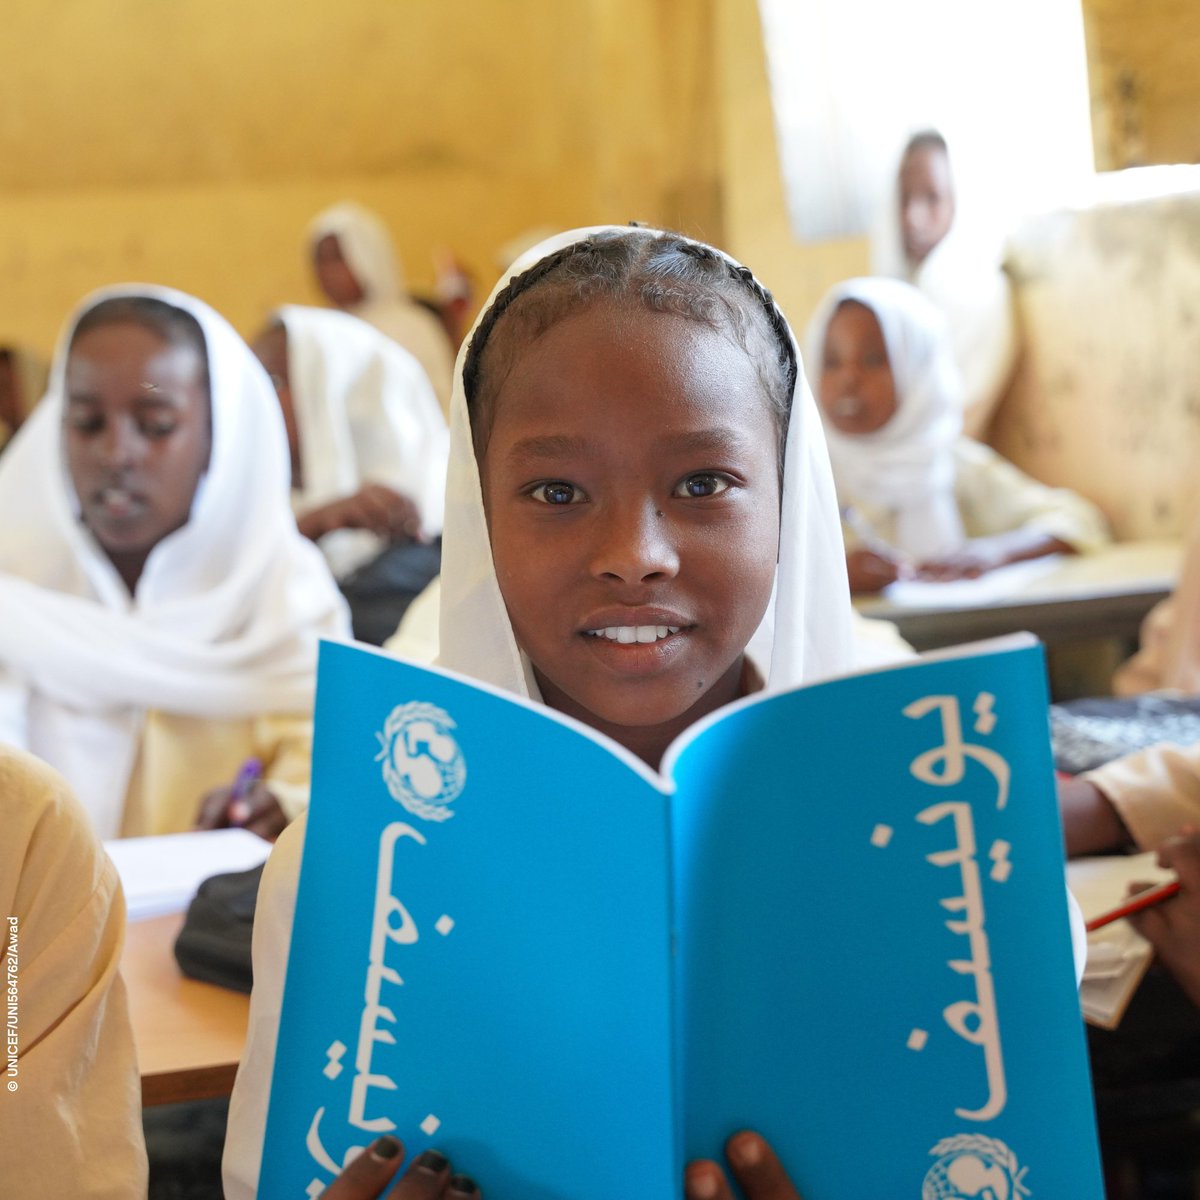 Amidst conflict, a sanctuary for learning. Students at the elementary school in Red Sea State attend their classes after a year of closure due to the ongoing war in #Sudan. UNICEF continues to advocate for the safe reopening of schools in all locations where it is possible.